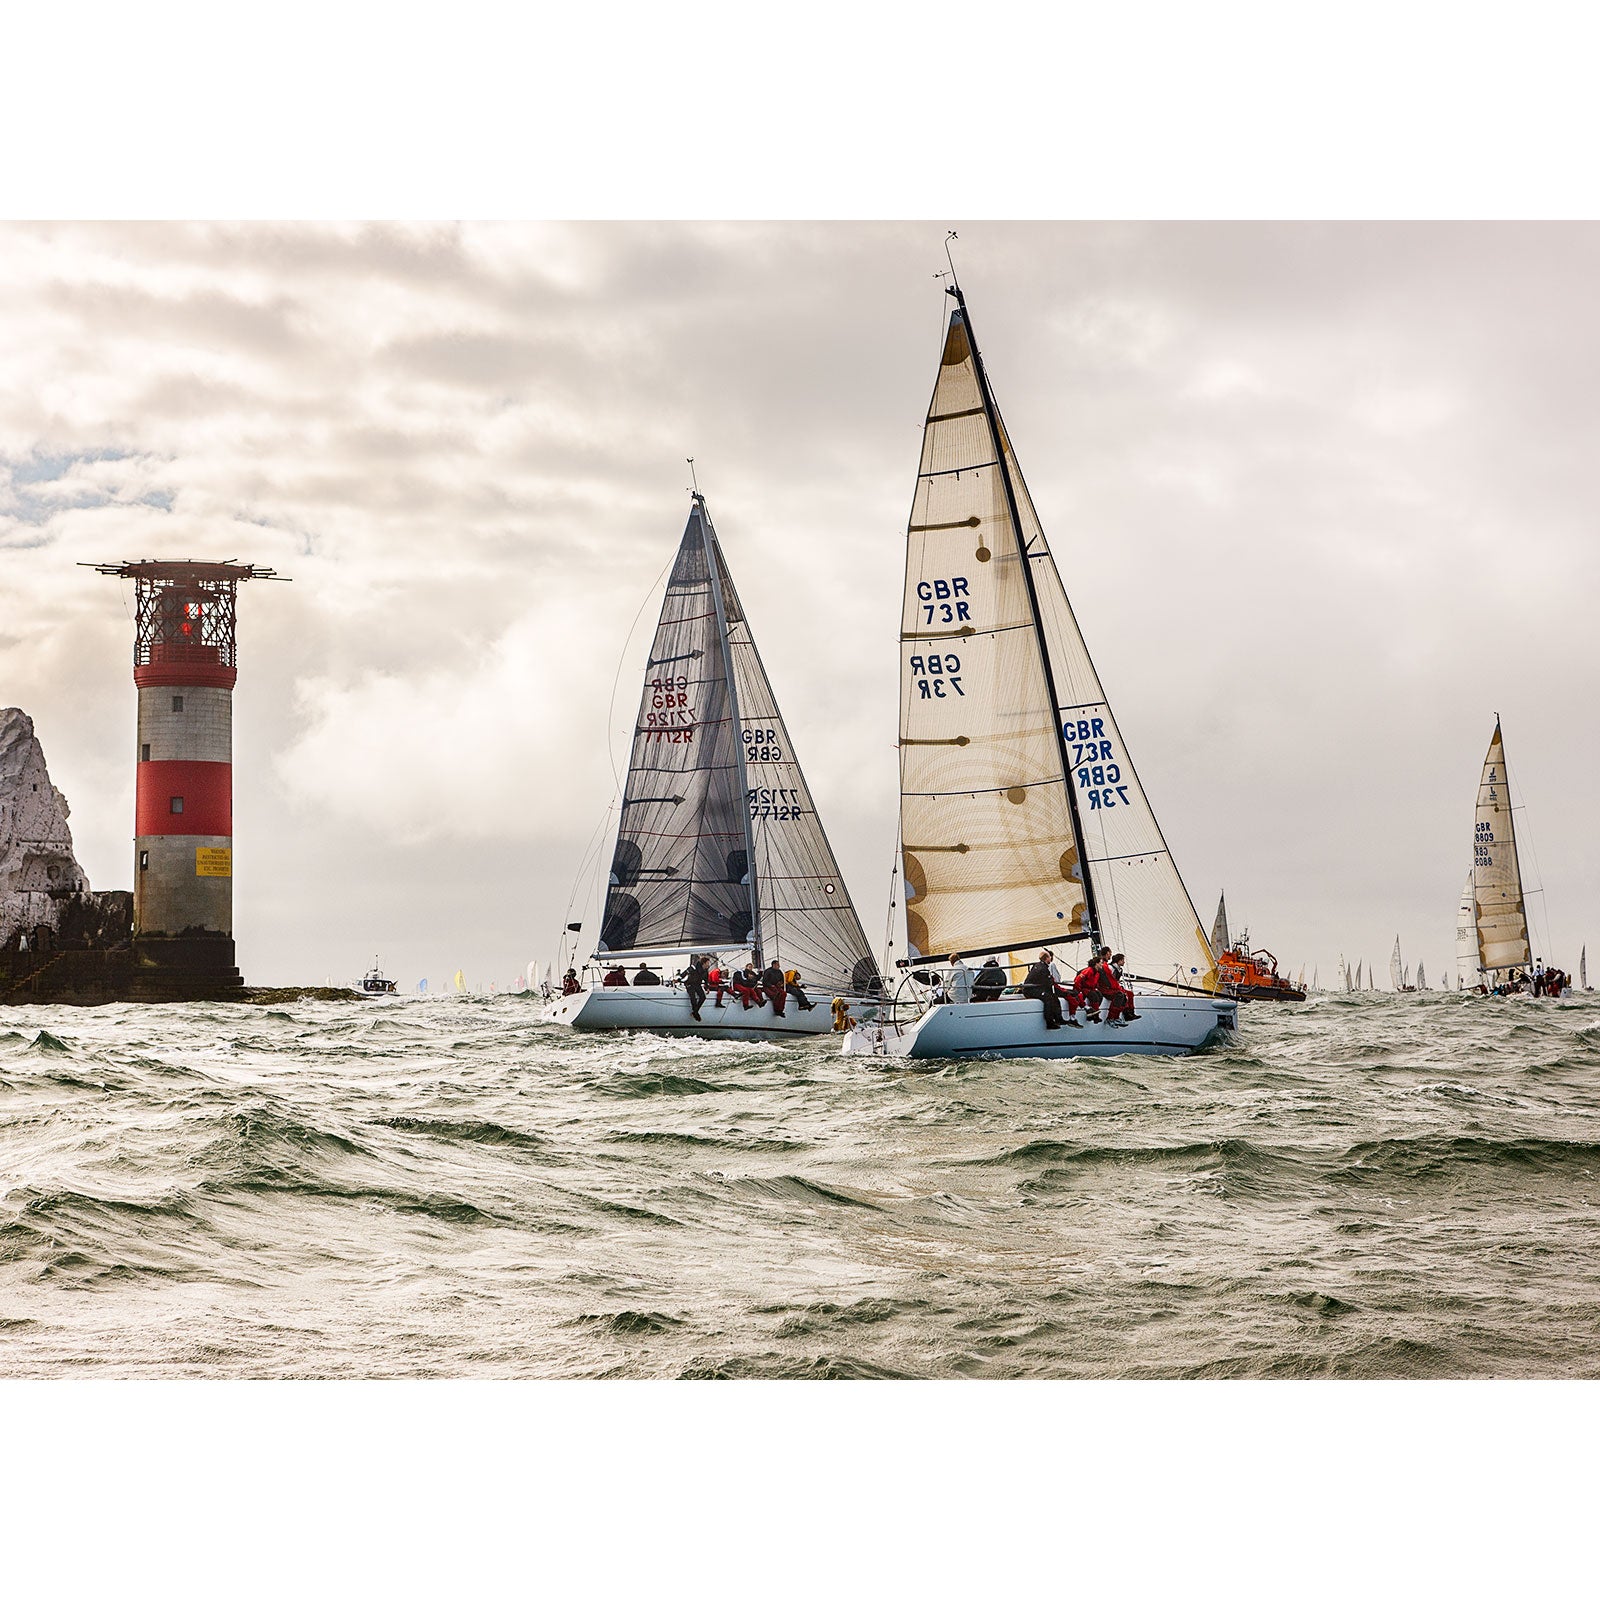 Sailboats racing near a lighthouse on the choppy sea off the Isle of Wight under a cloudy sky, captured by Available Light Photography during the Round the Island Race.